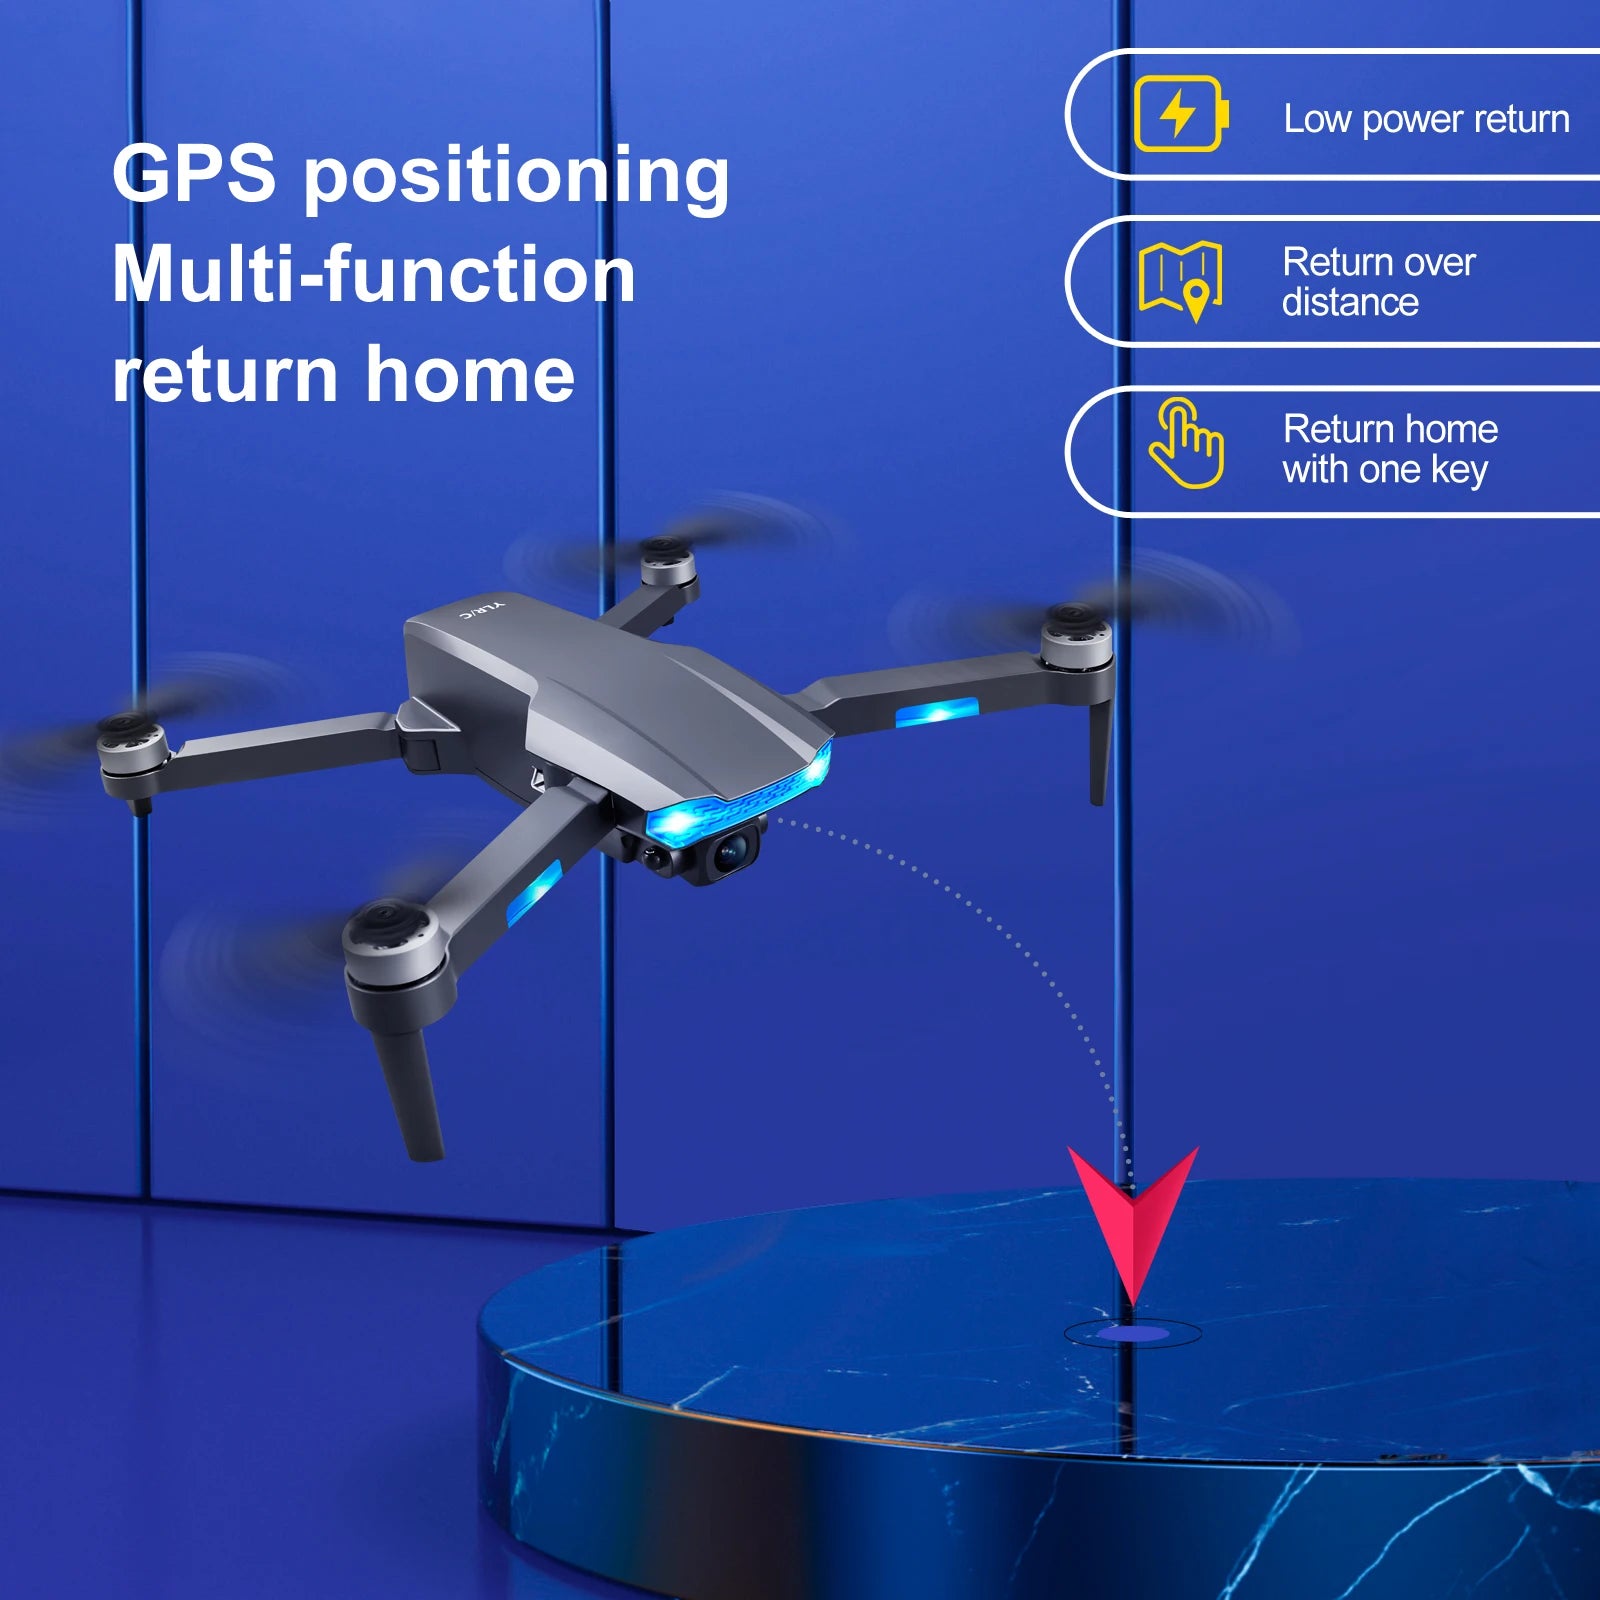 QJ S106 GPS Drone, low power return gps positioning return over distance return home with